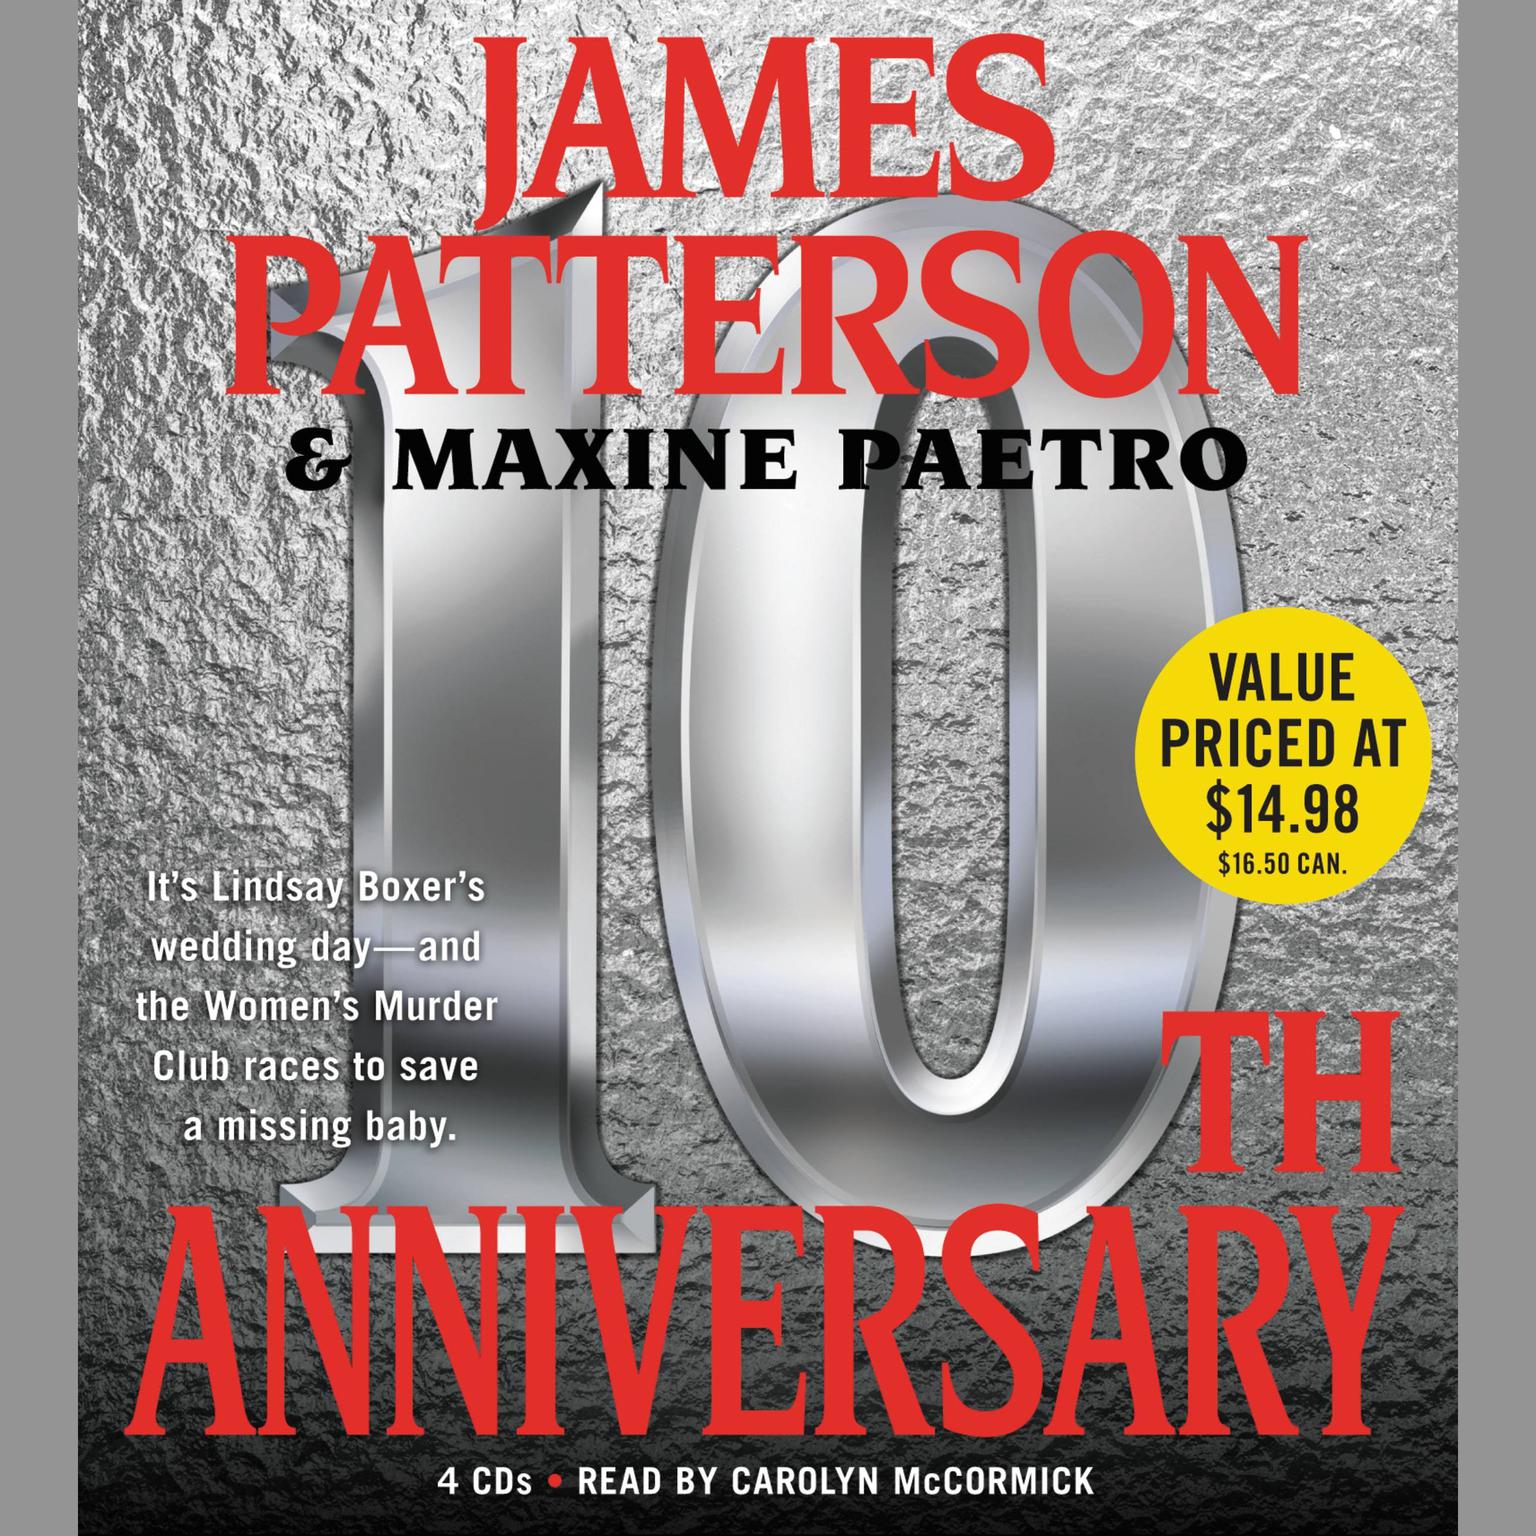 10th Anniversary (Abridged) Audiobook, by James Patterson